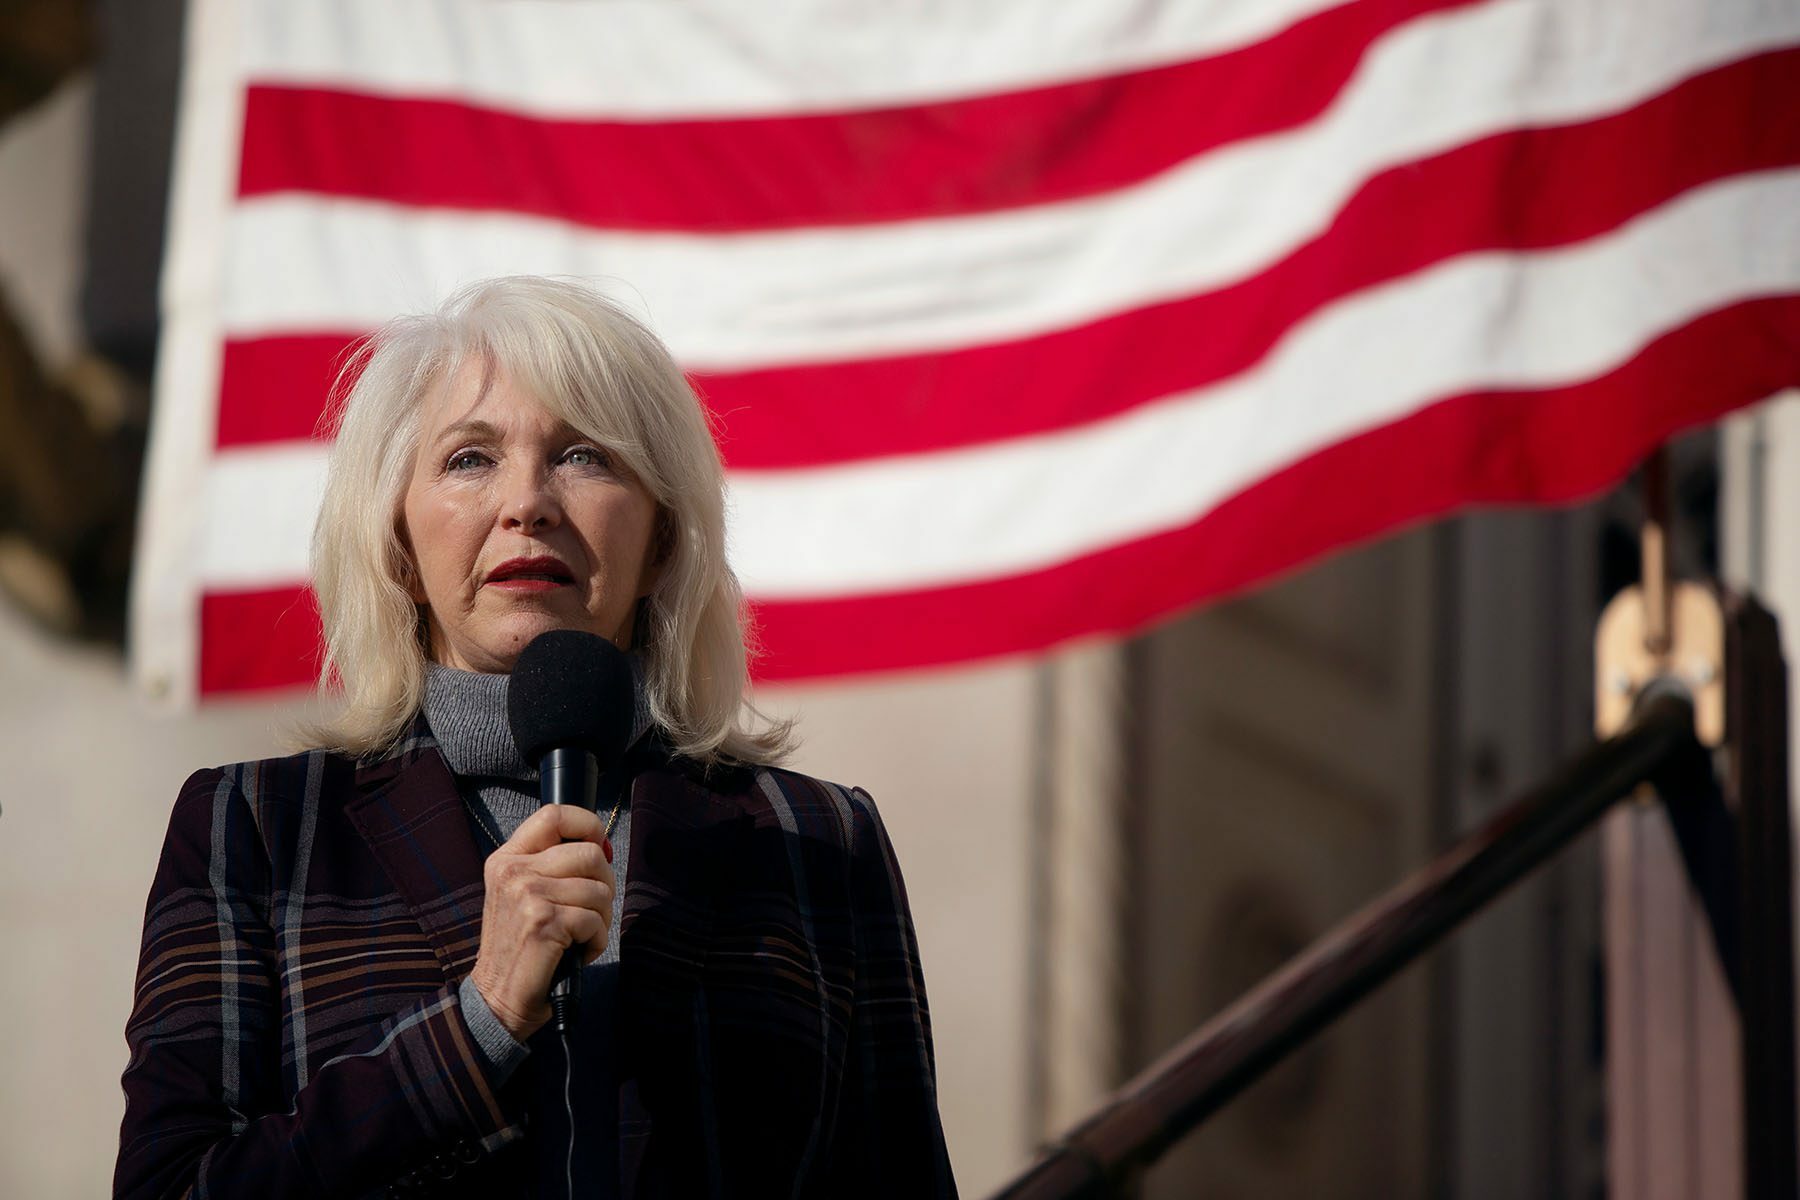 Tina Peters speaks into a microphone. An American flag can be seen in the background.